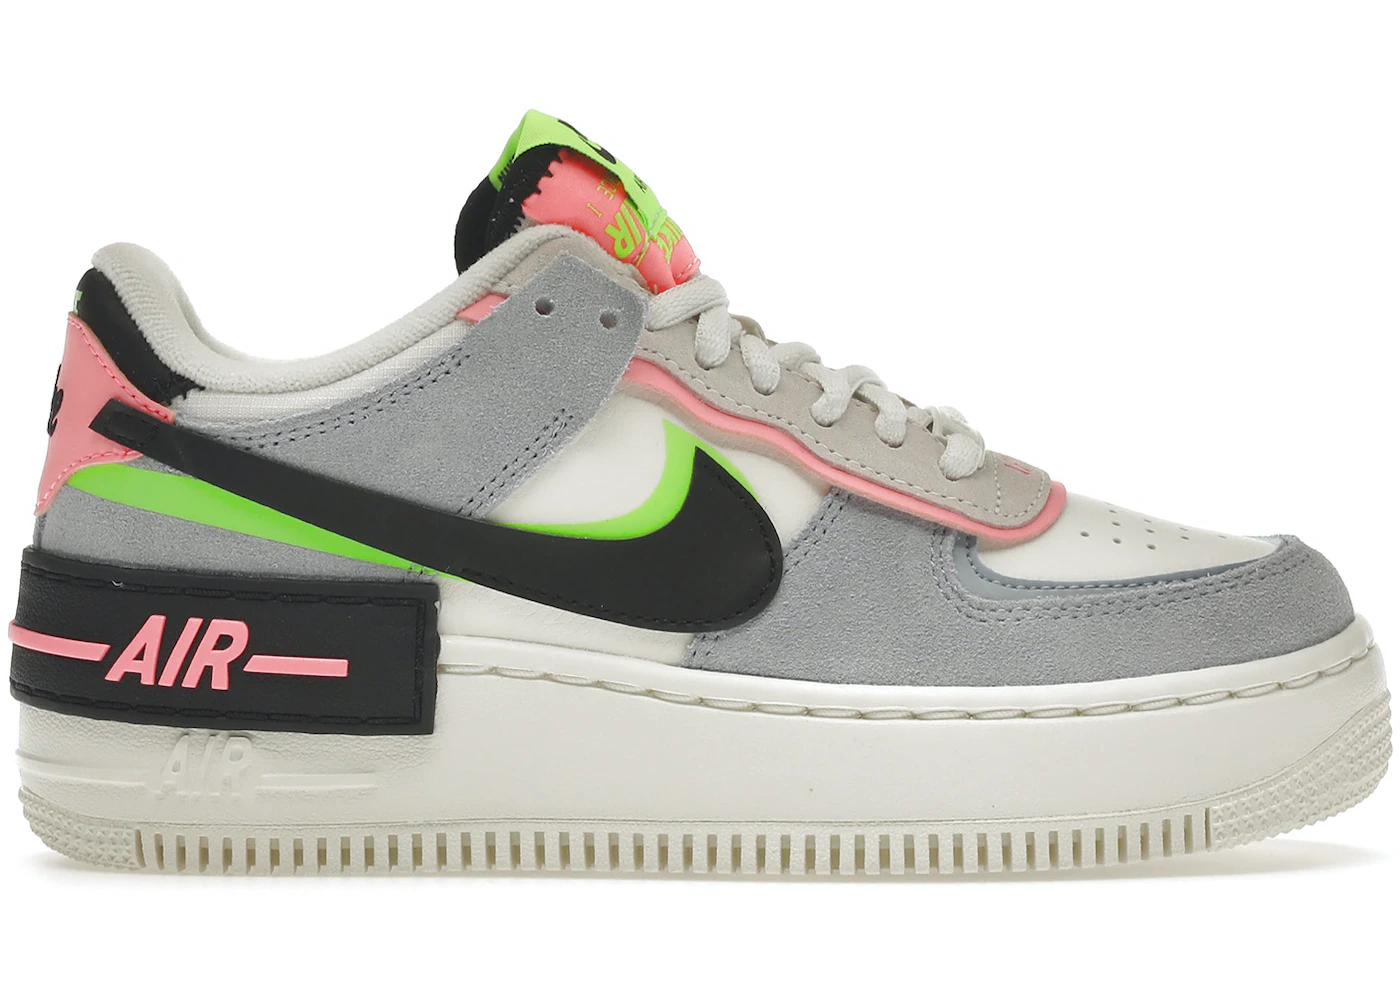 Nike Air Force 1 Low Shadow Sunset Pulse (Women's) - CU8591-101 - US